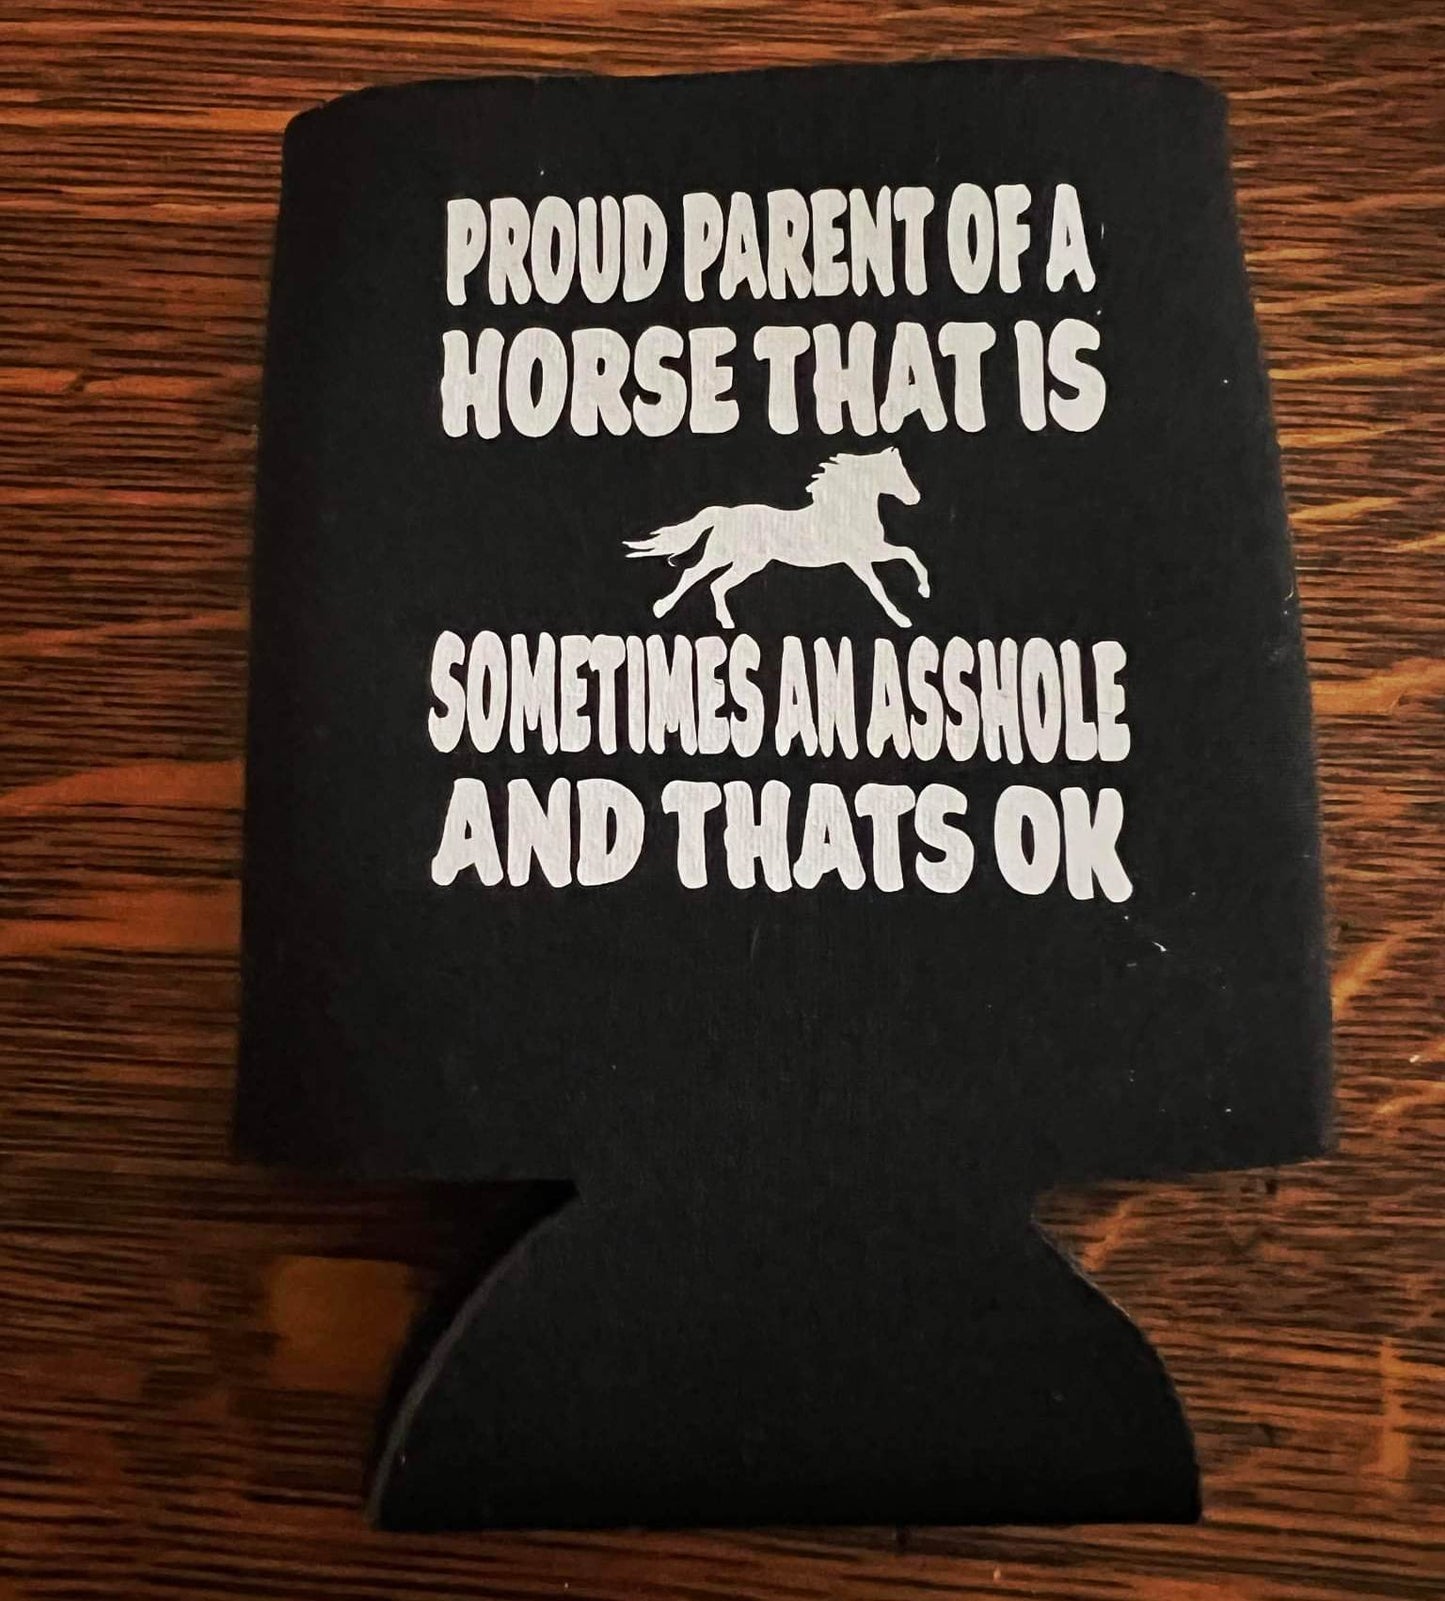 "Proud Parent of a Horse" DIY Etched Wine Glass